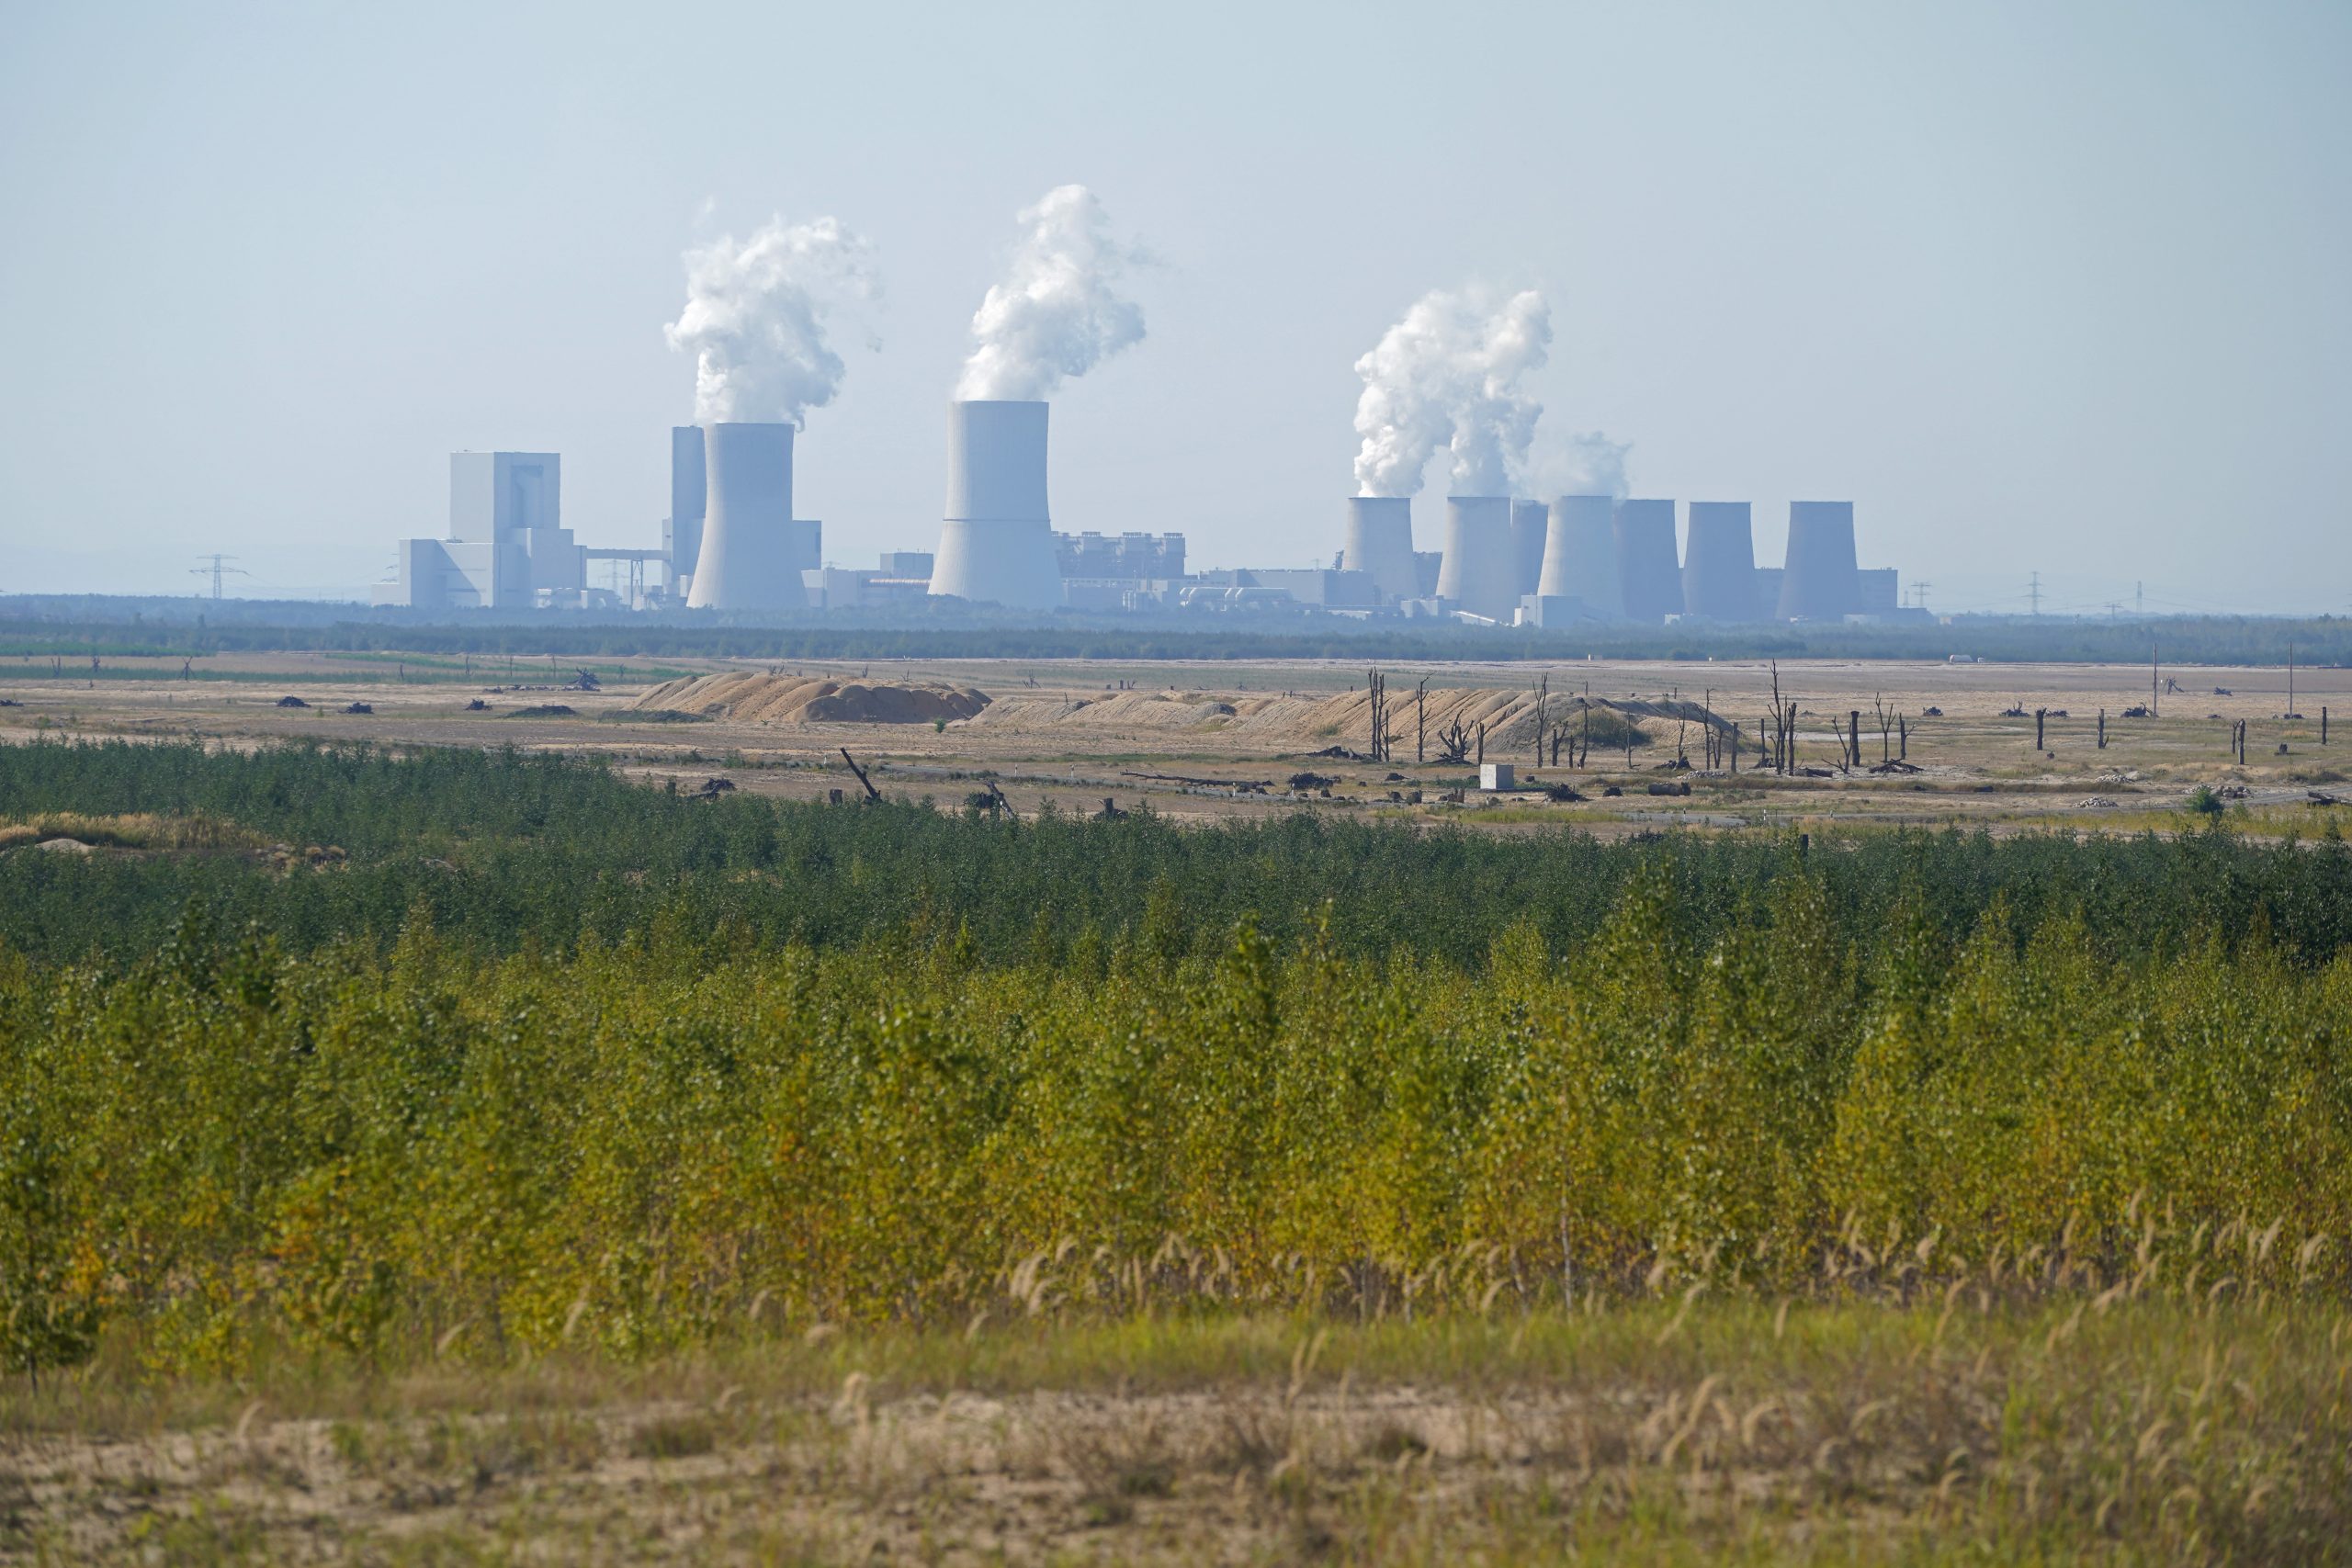 Image of coal plants far off in the distance emitting pollution, with green grass and flatlands in the foreground.